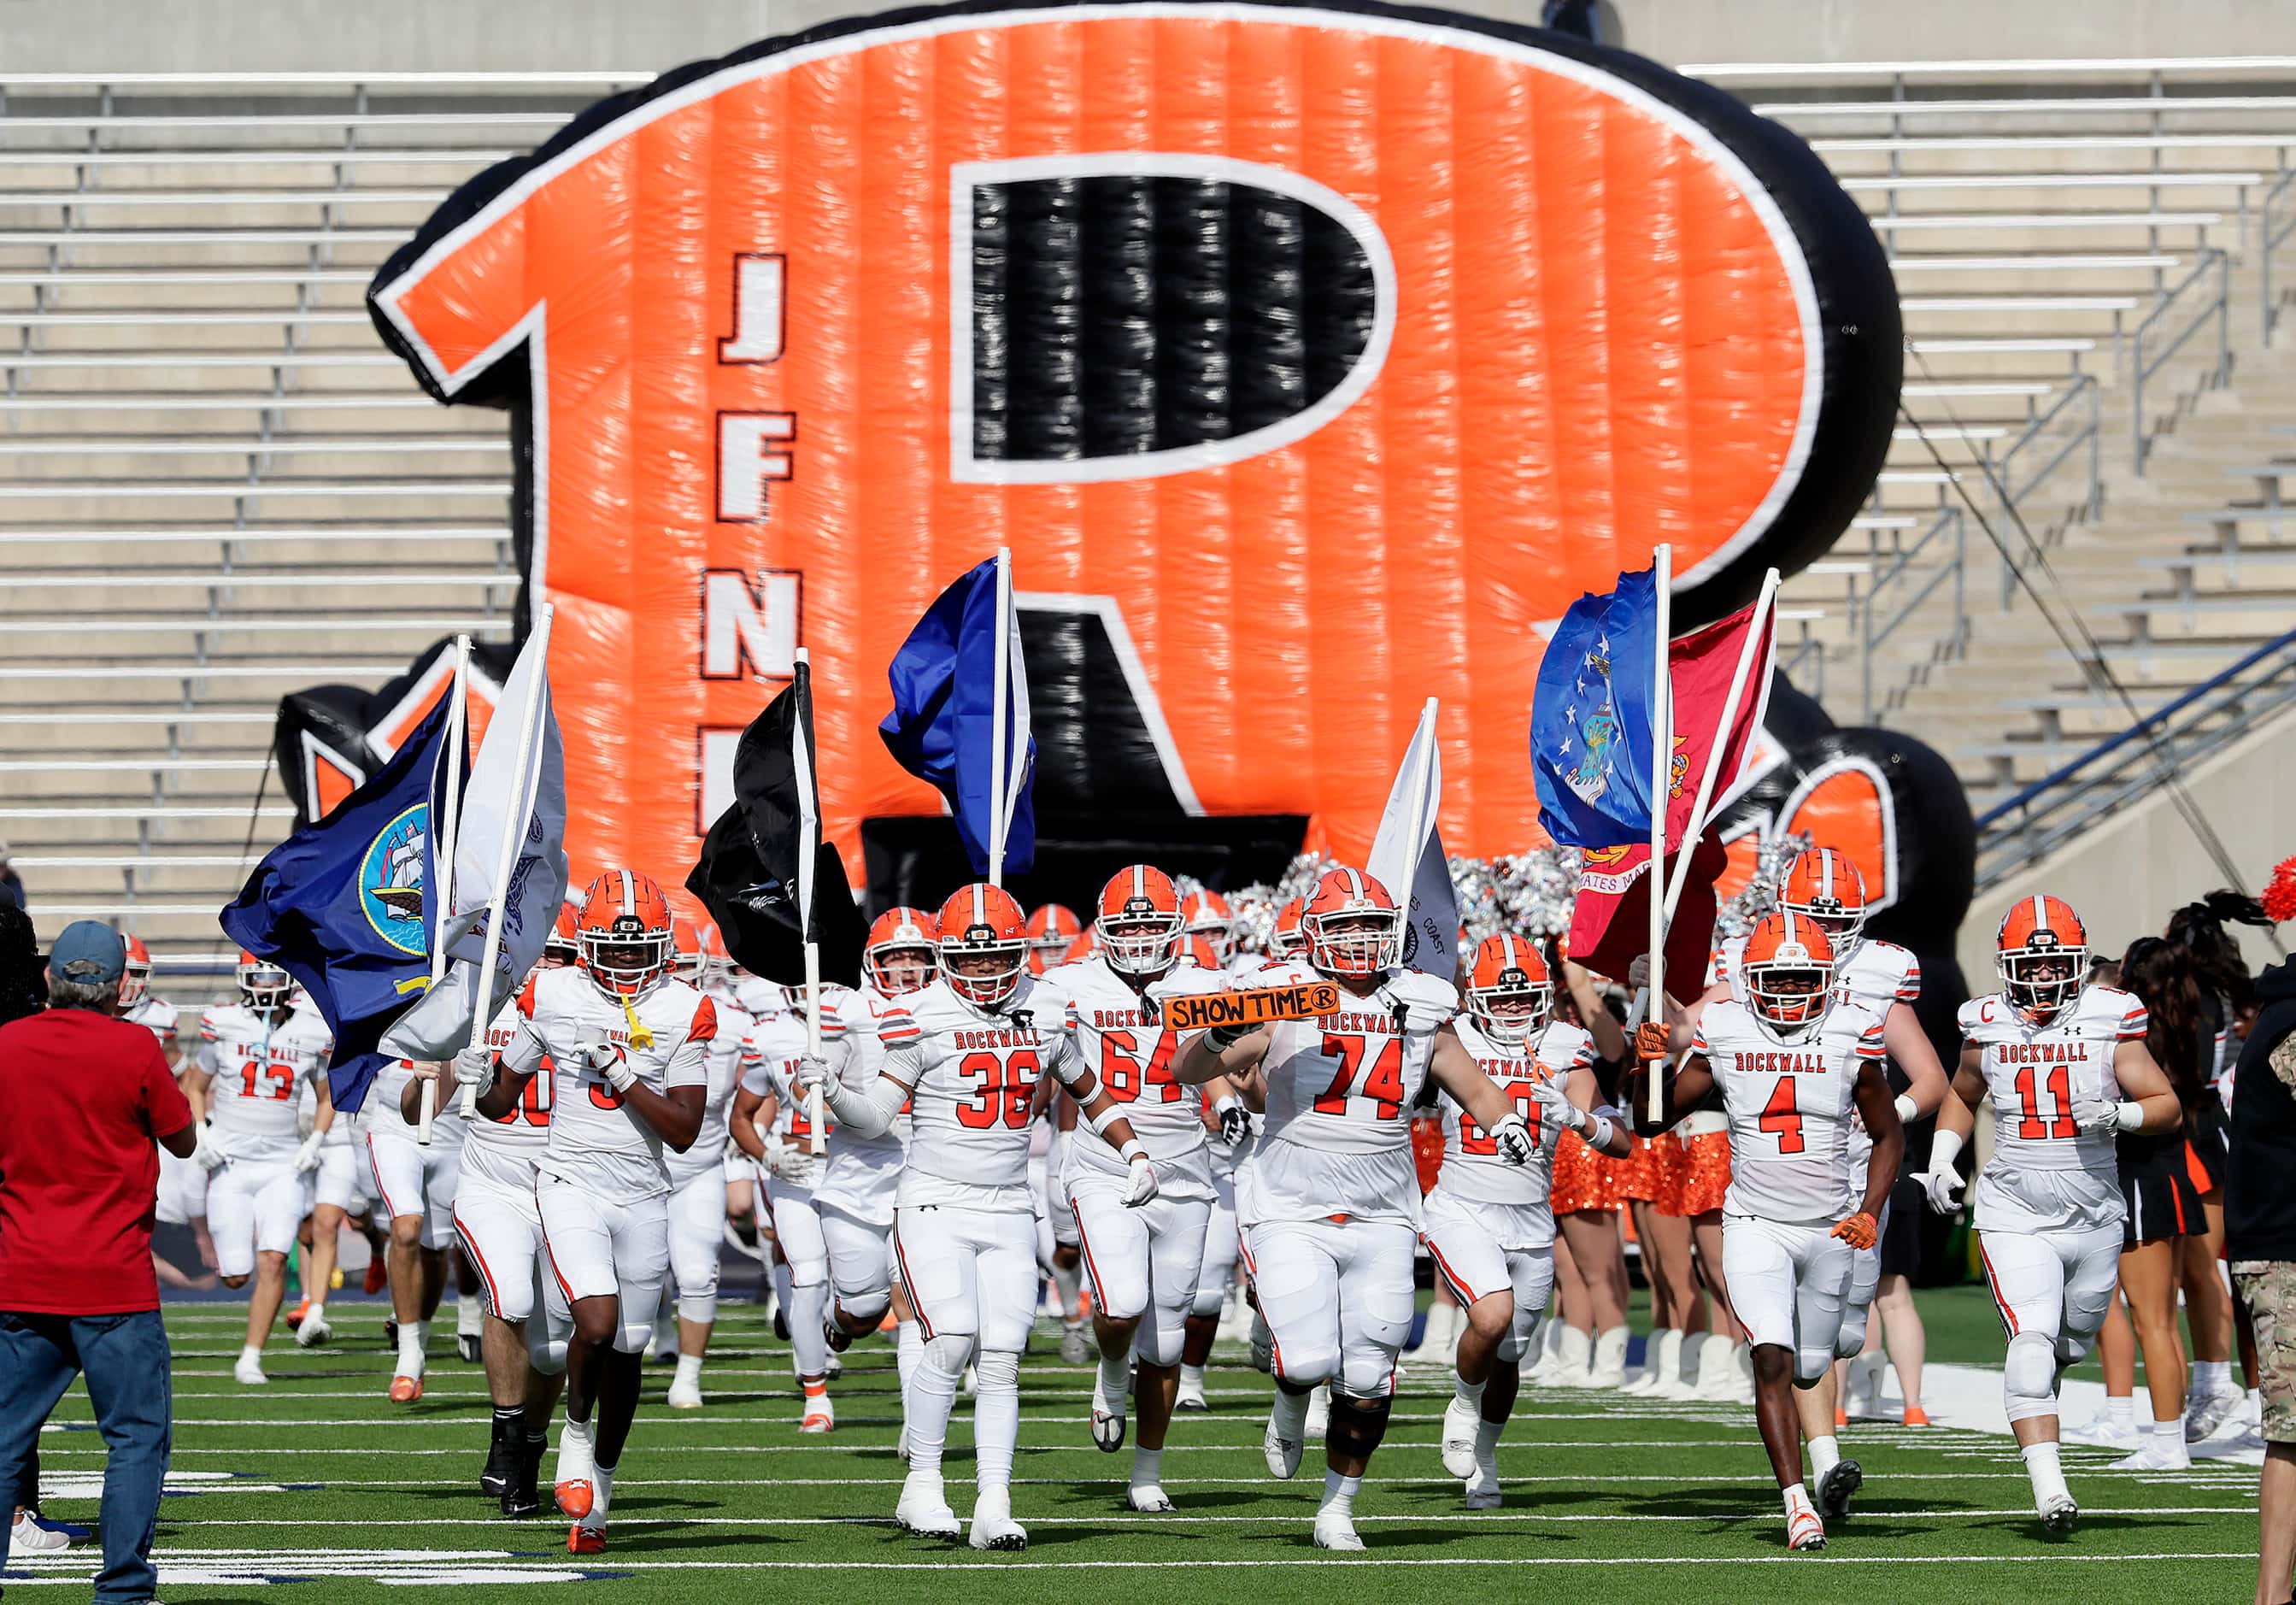 The Rockwall High School football team takes the field before kickoff as Rockwall High...